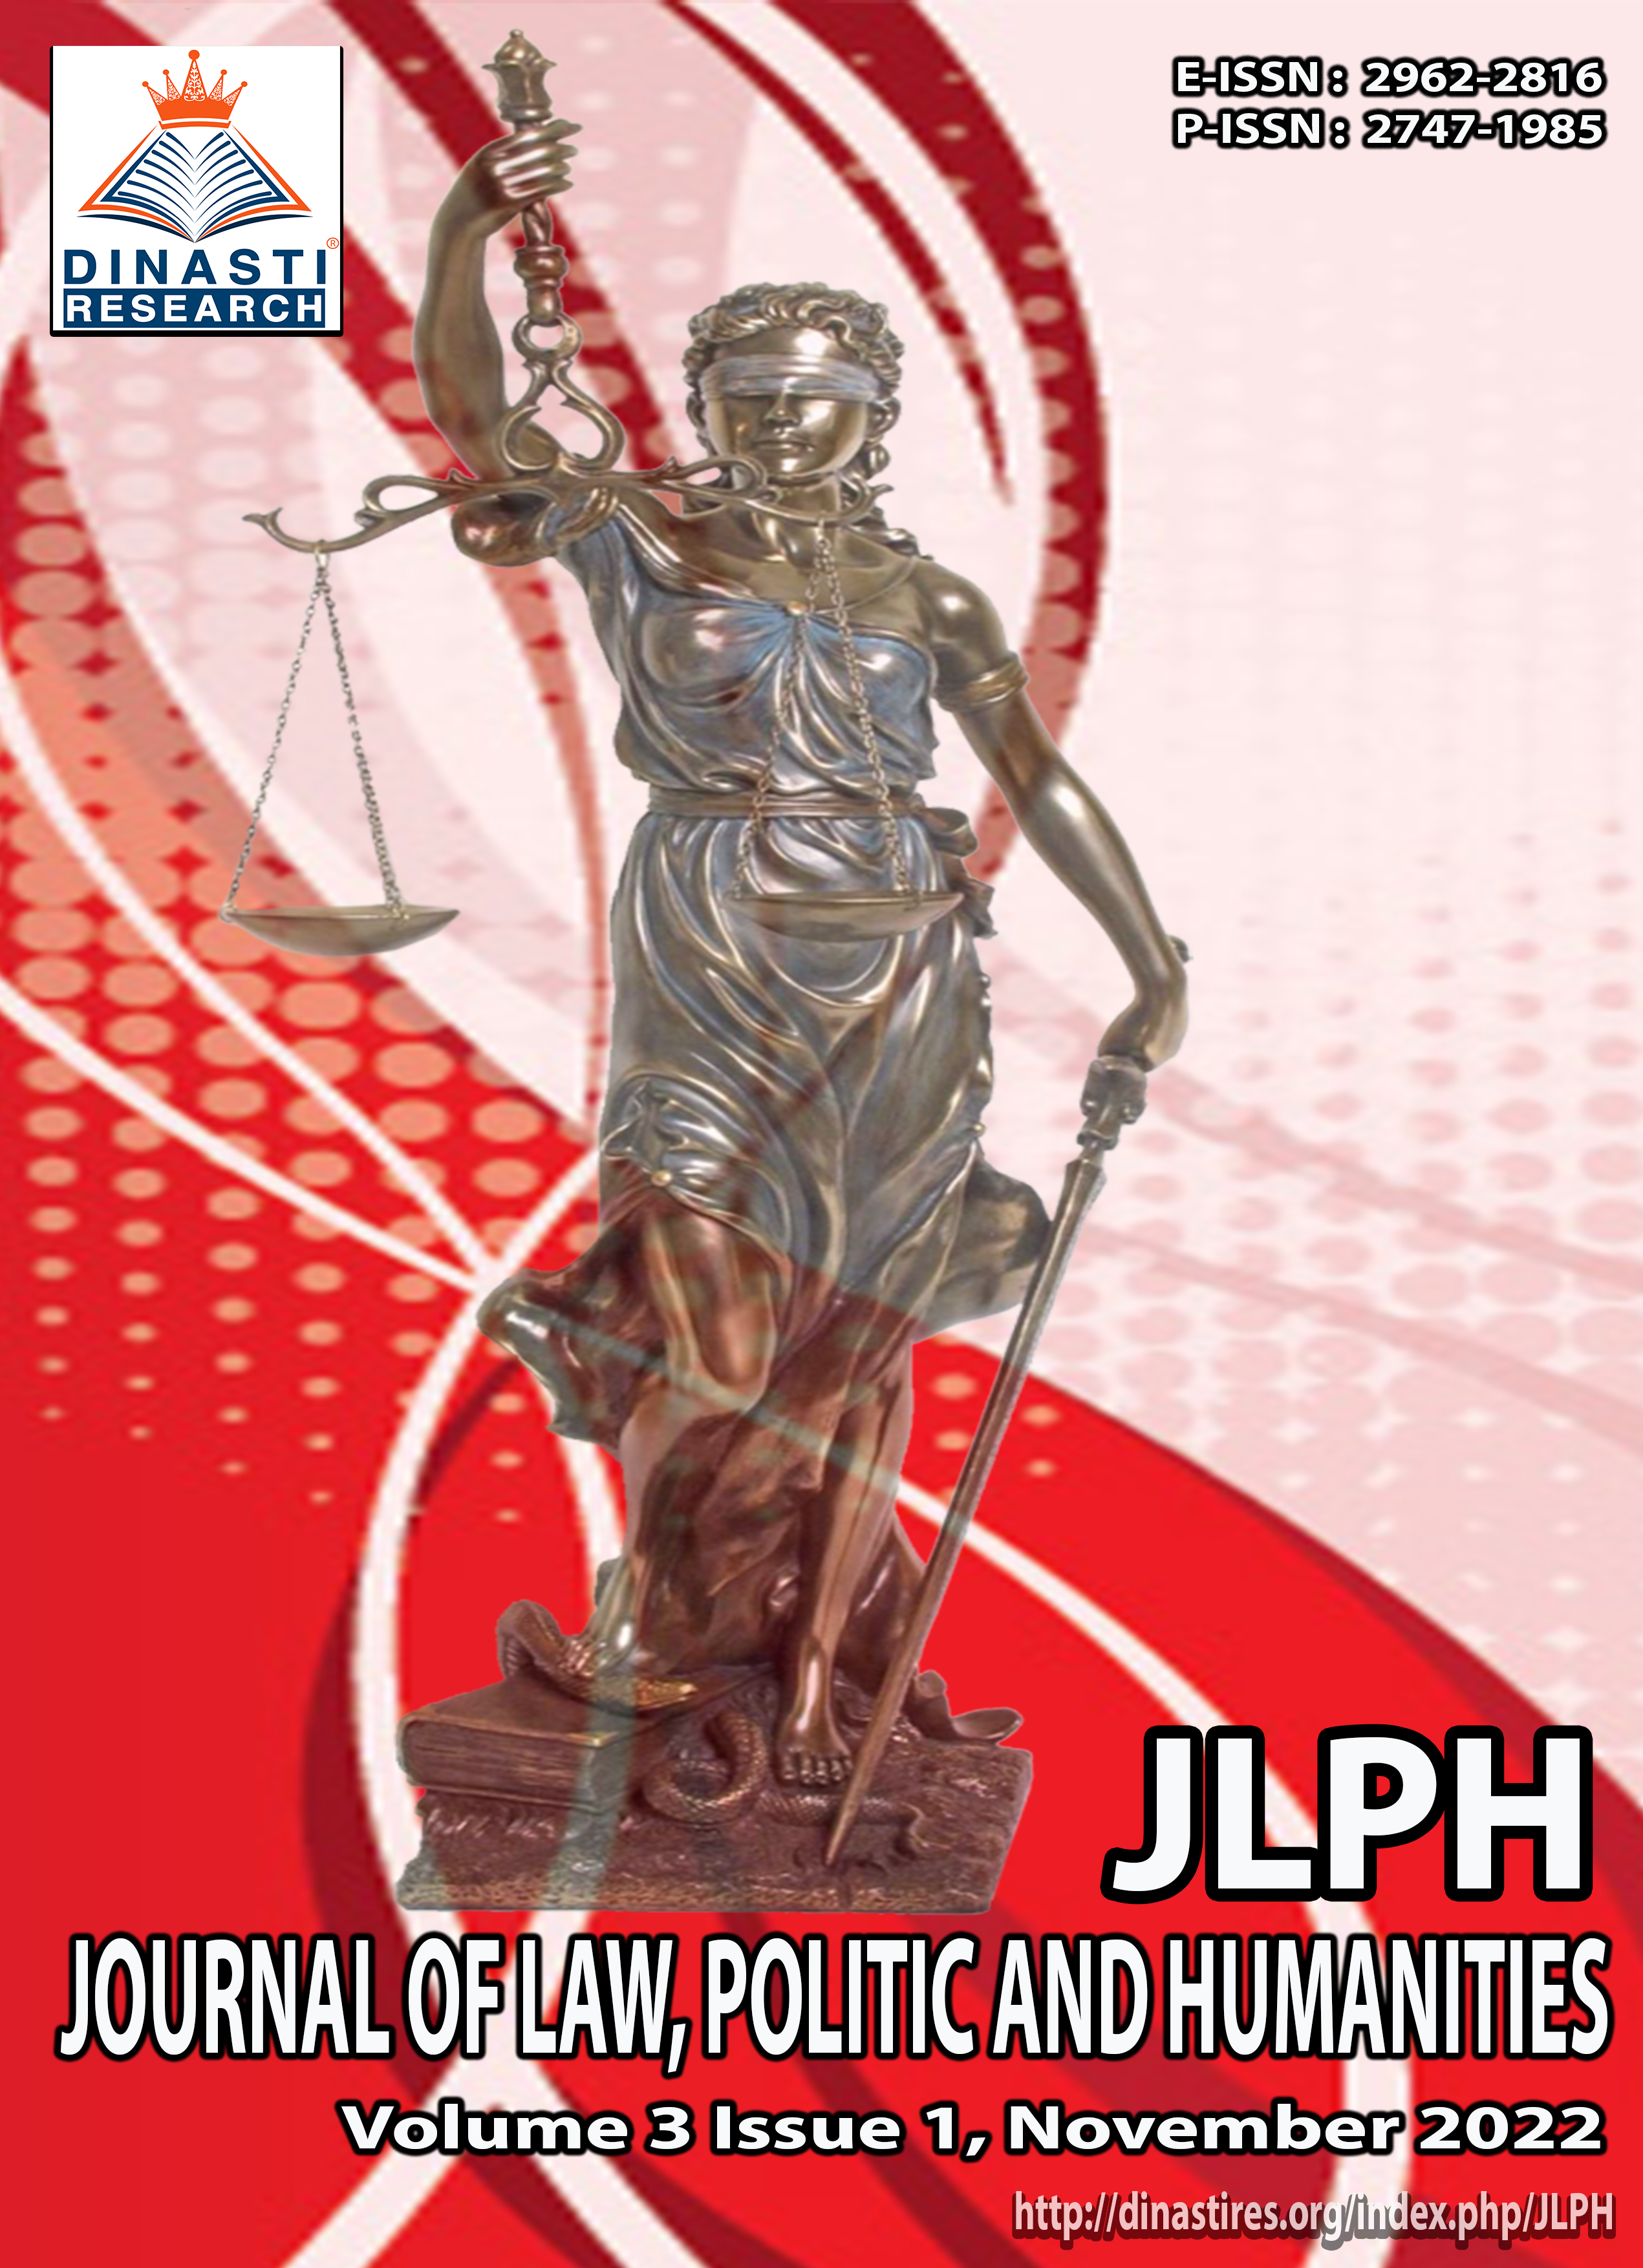 					View Vol. 3 No. 1 (2022): (JLPH) Journal of Law, Politic and Humanities (November 2022)
				